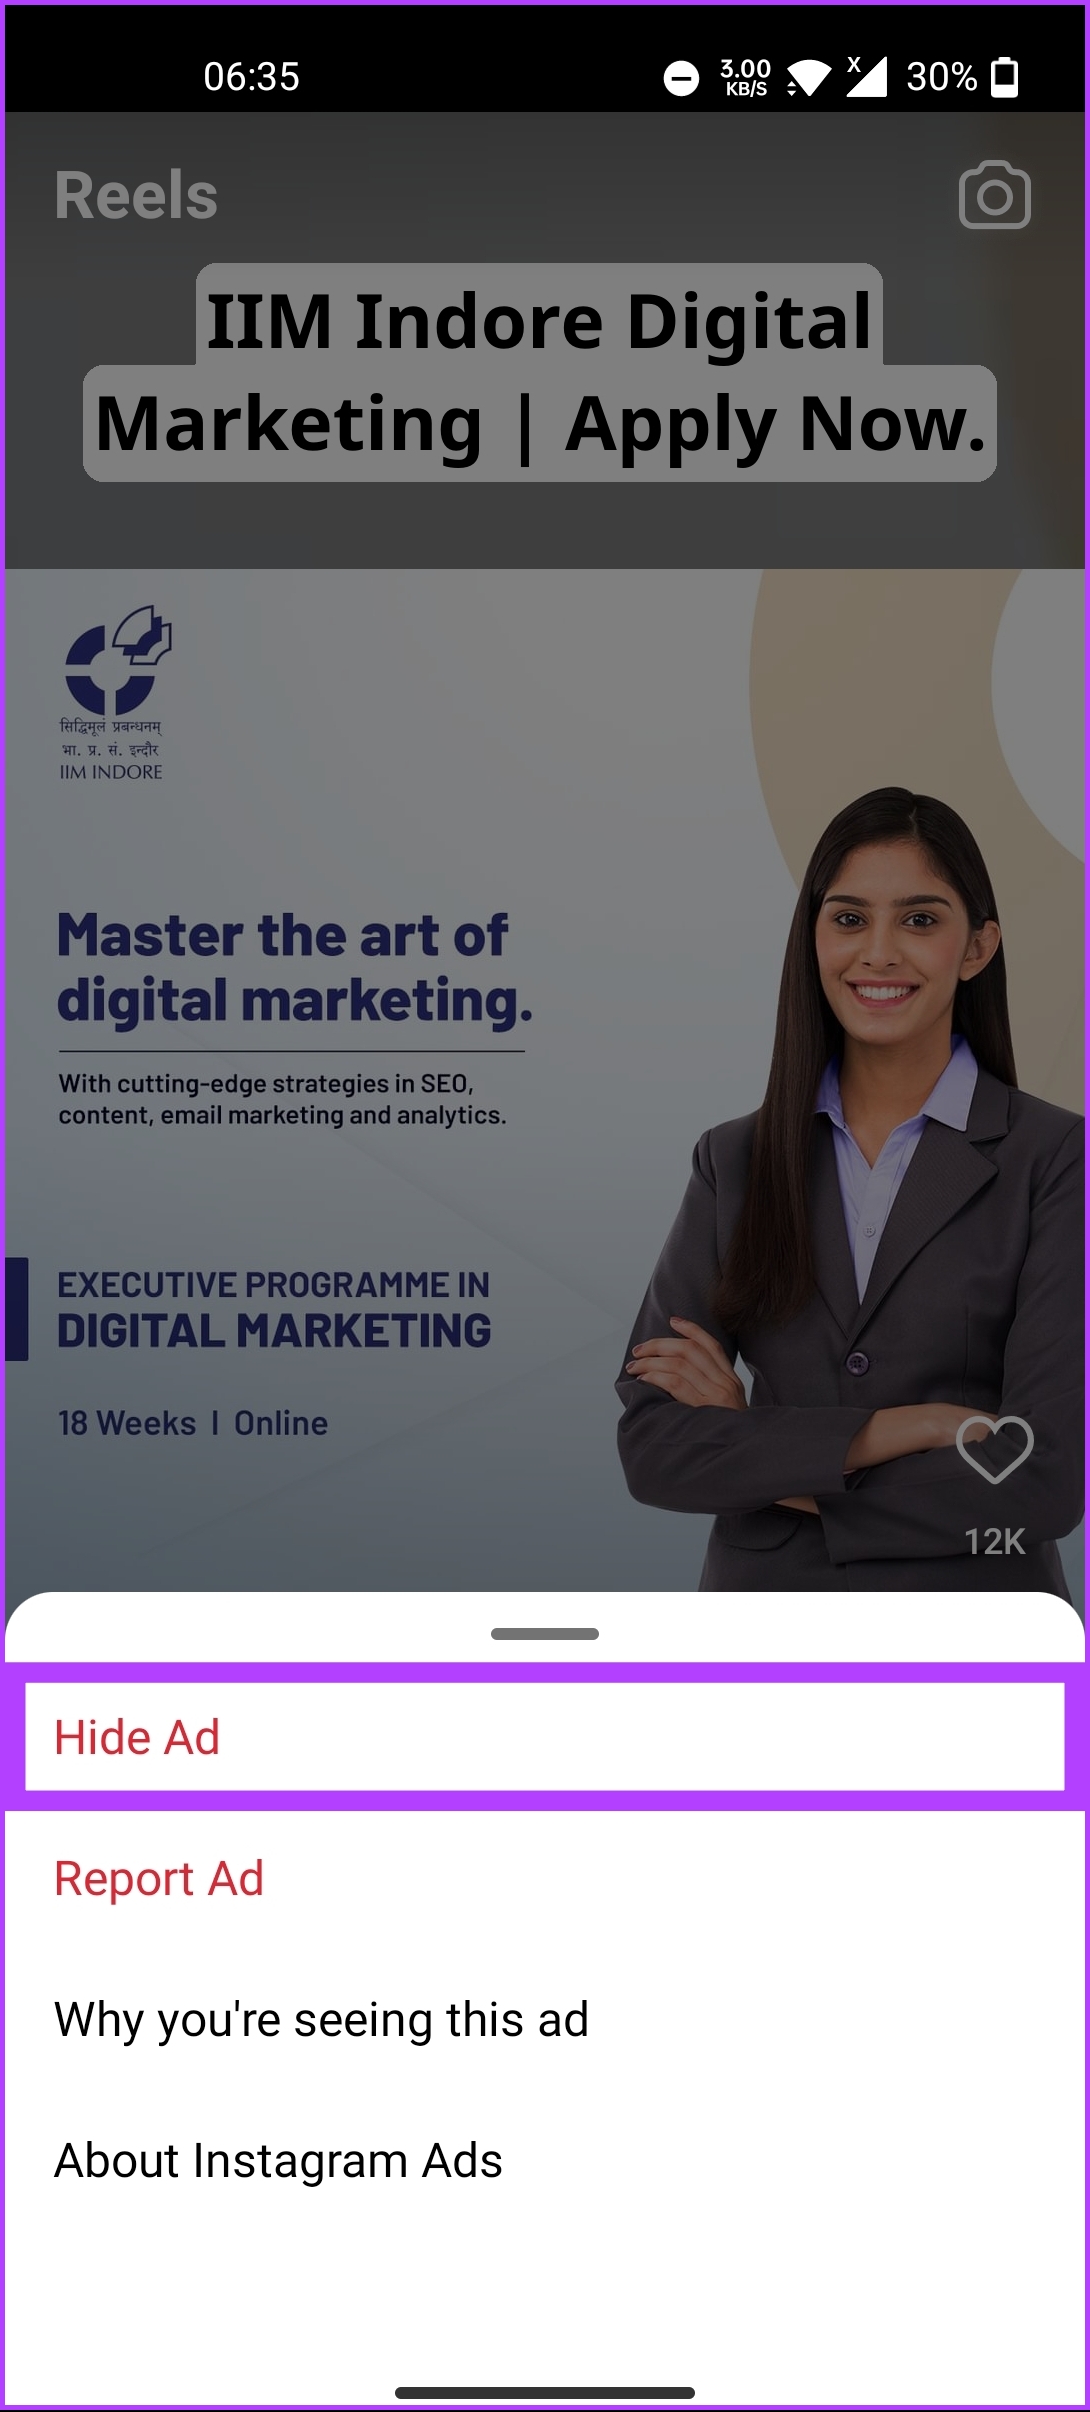 tap on Hide ad